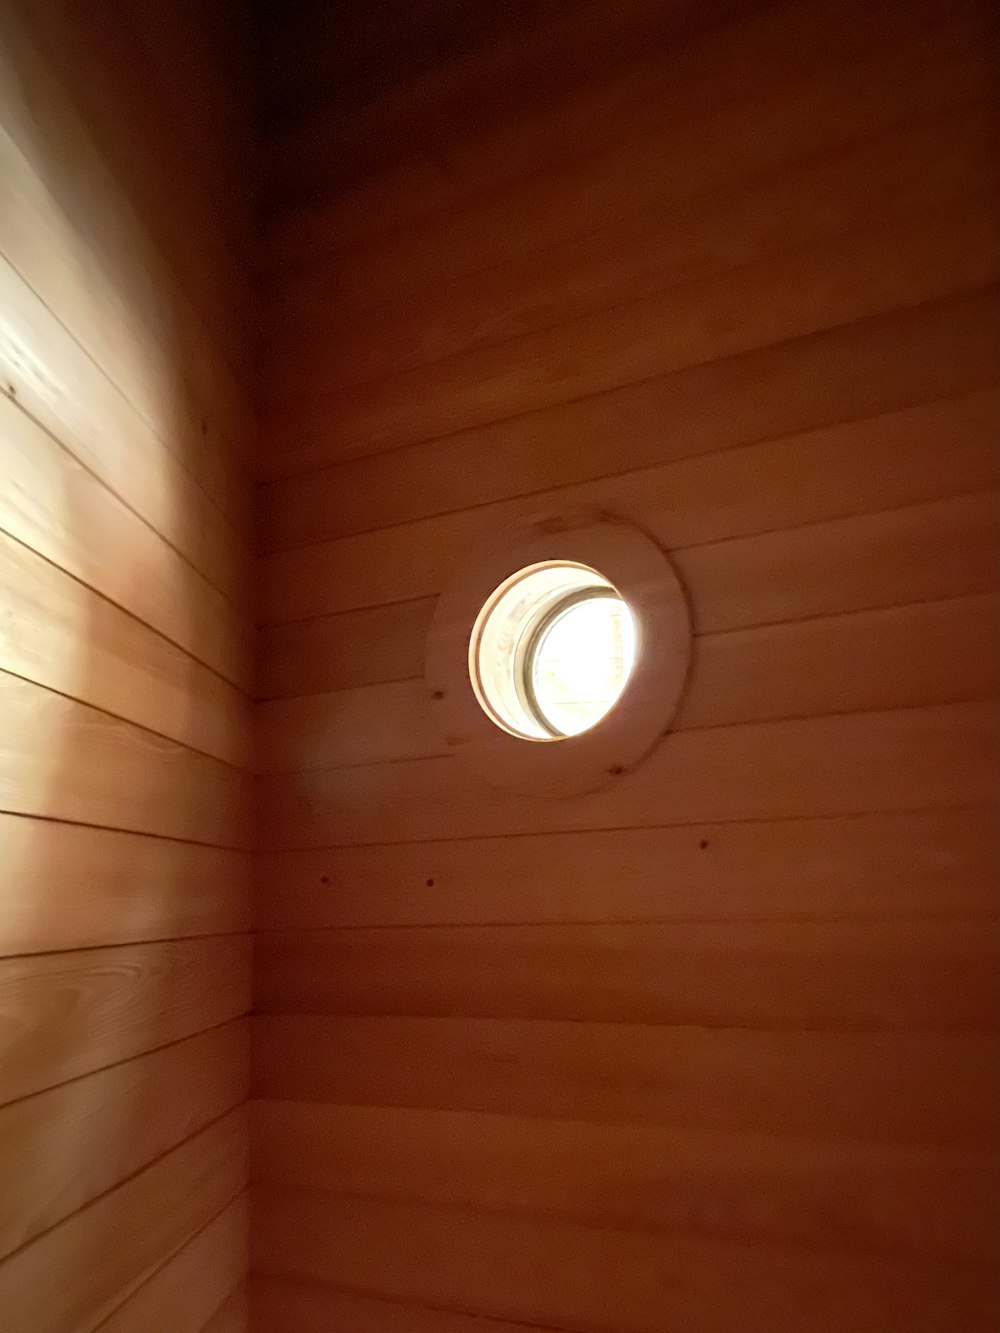 a small round window in a wooden wall